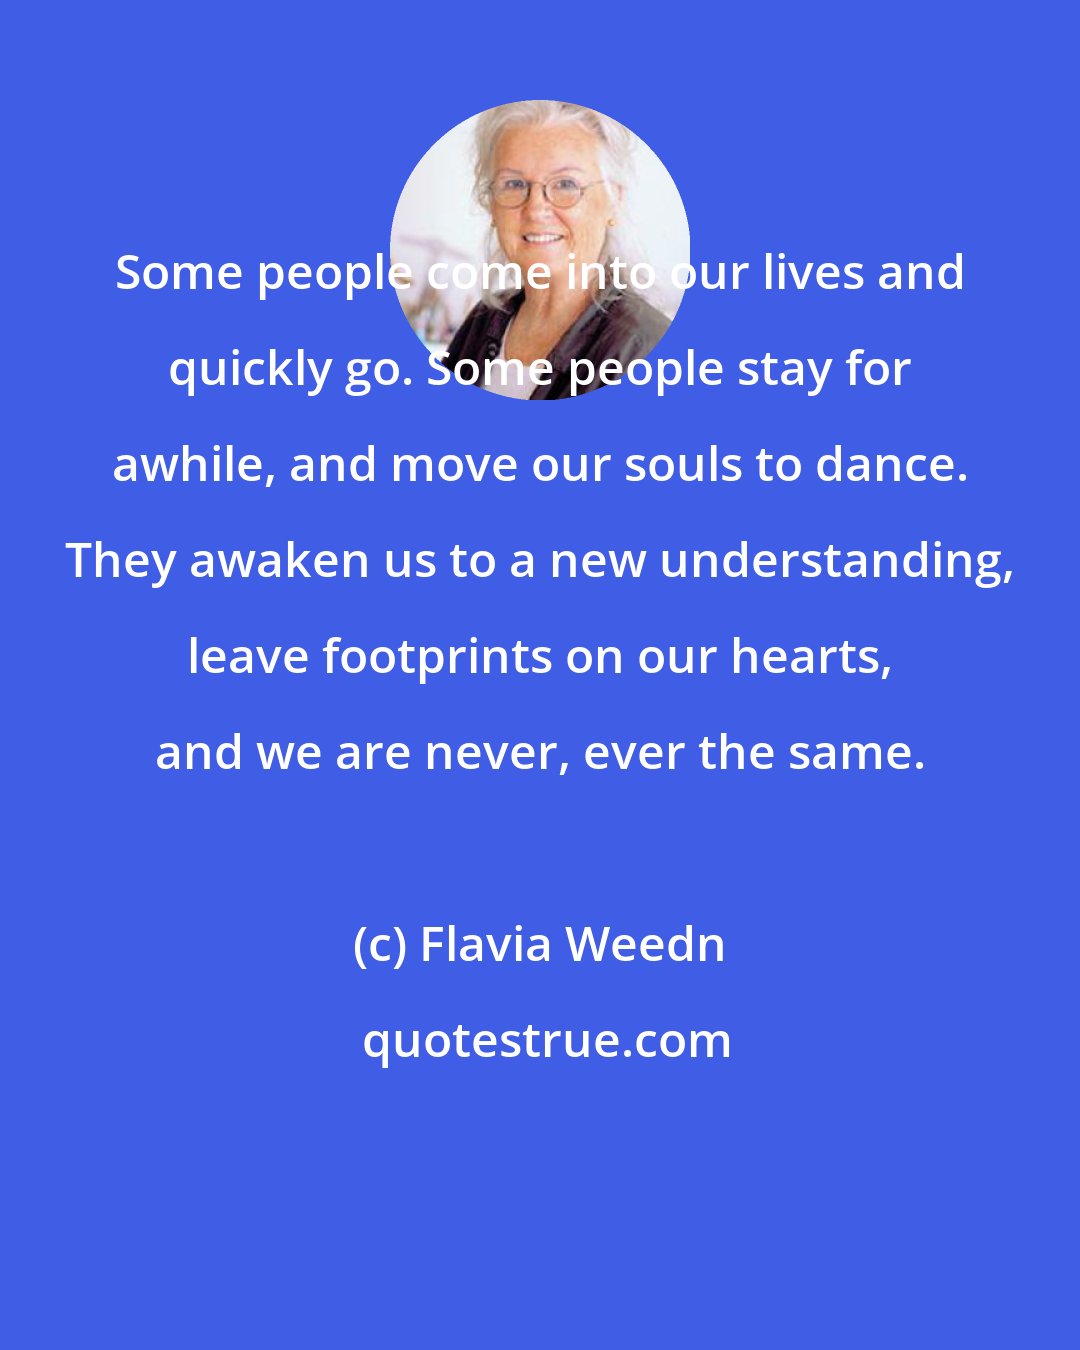 Flavia Weedn: Some people come into our lives and quickly go. Some people stay for awhile, and move our souls to dance. They awaken us to a new understanding, leave footprints on our hearts, and we are never, ever the same.